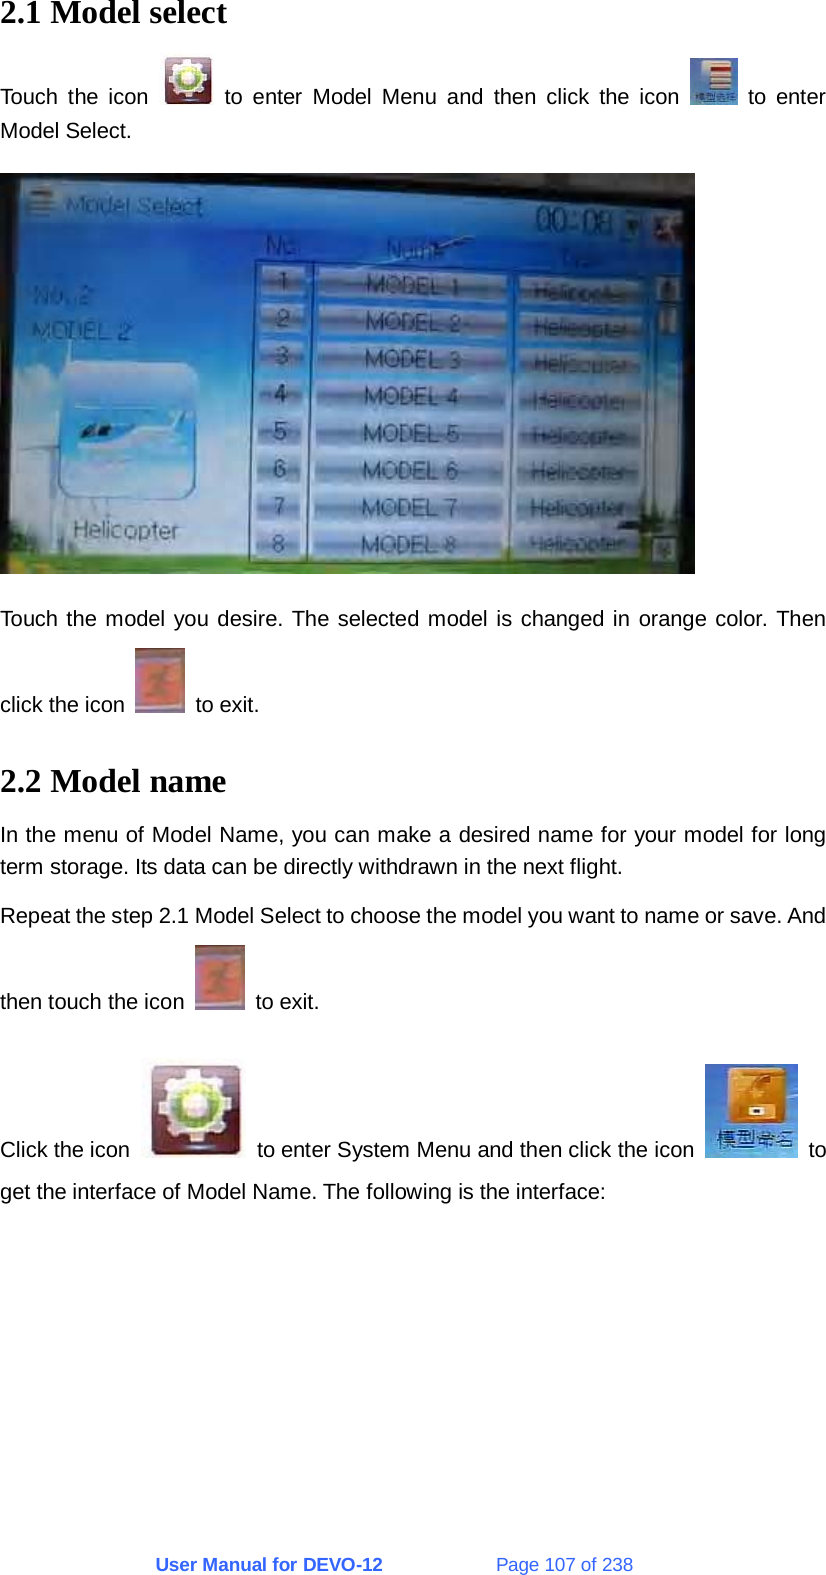 User Manual for DEVO-12             Page 107 of 238 2.1 Model select Touch the icon   to enter Model Menu and then click the icon   to enter Model Select.  Touch the model you desire. The selected model is changed in orange color. Then click the icon   to exit. 2.2 Model name In the menu of Model Name, you can make a desired name for your model for long term storage. Its data can be directly withdrawn in the next flight. Repeat the step 2.1 Model Select to choose the model you want to name or save. And then touch the icon   to exit. Click the icon    to enter System Menu and then click the icon   to get the interface of Model Name. The following is the interface: 